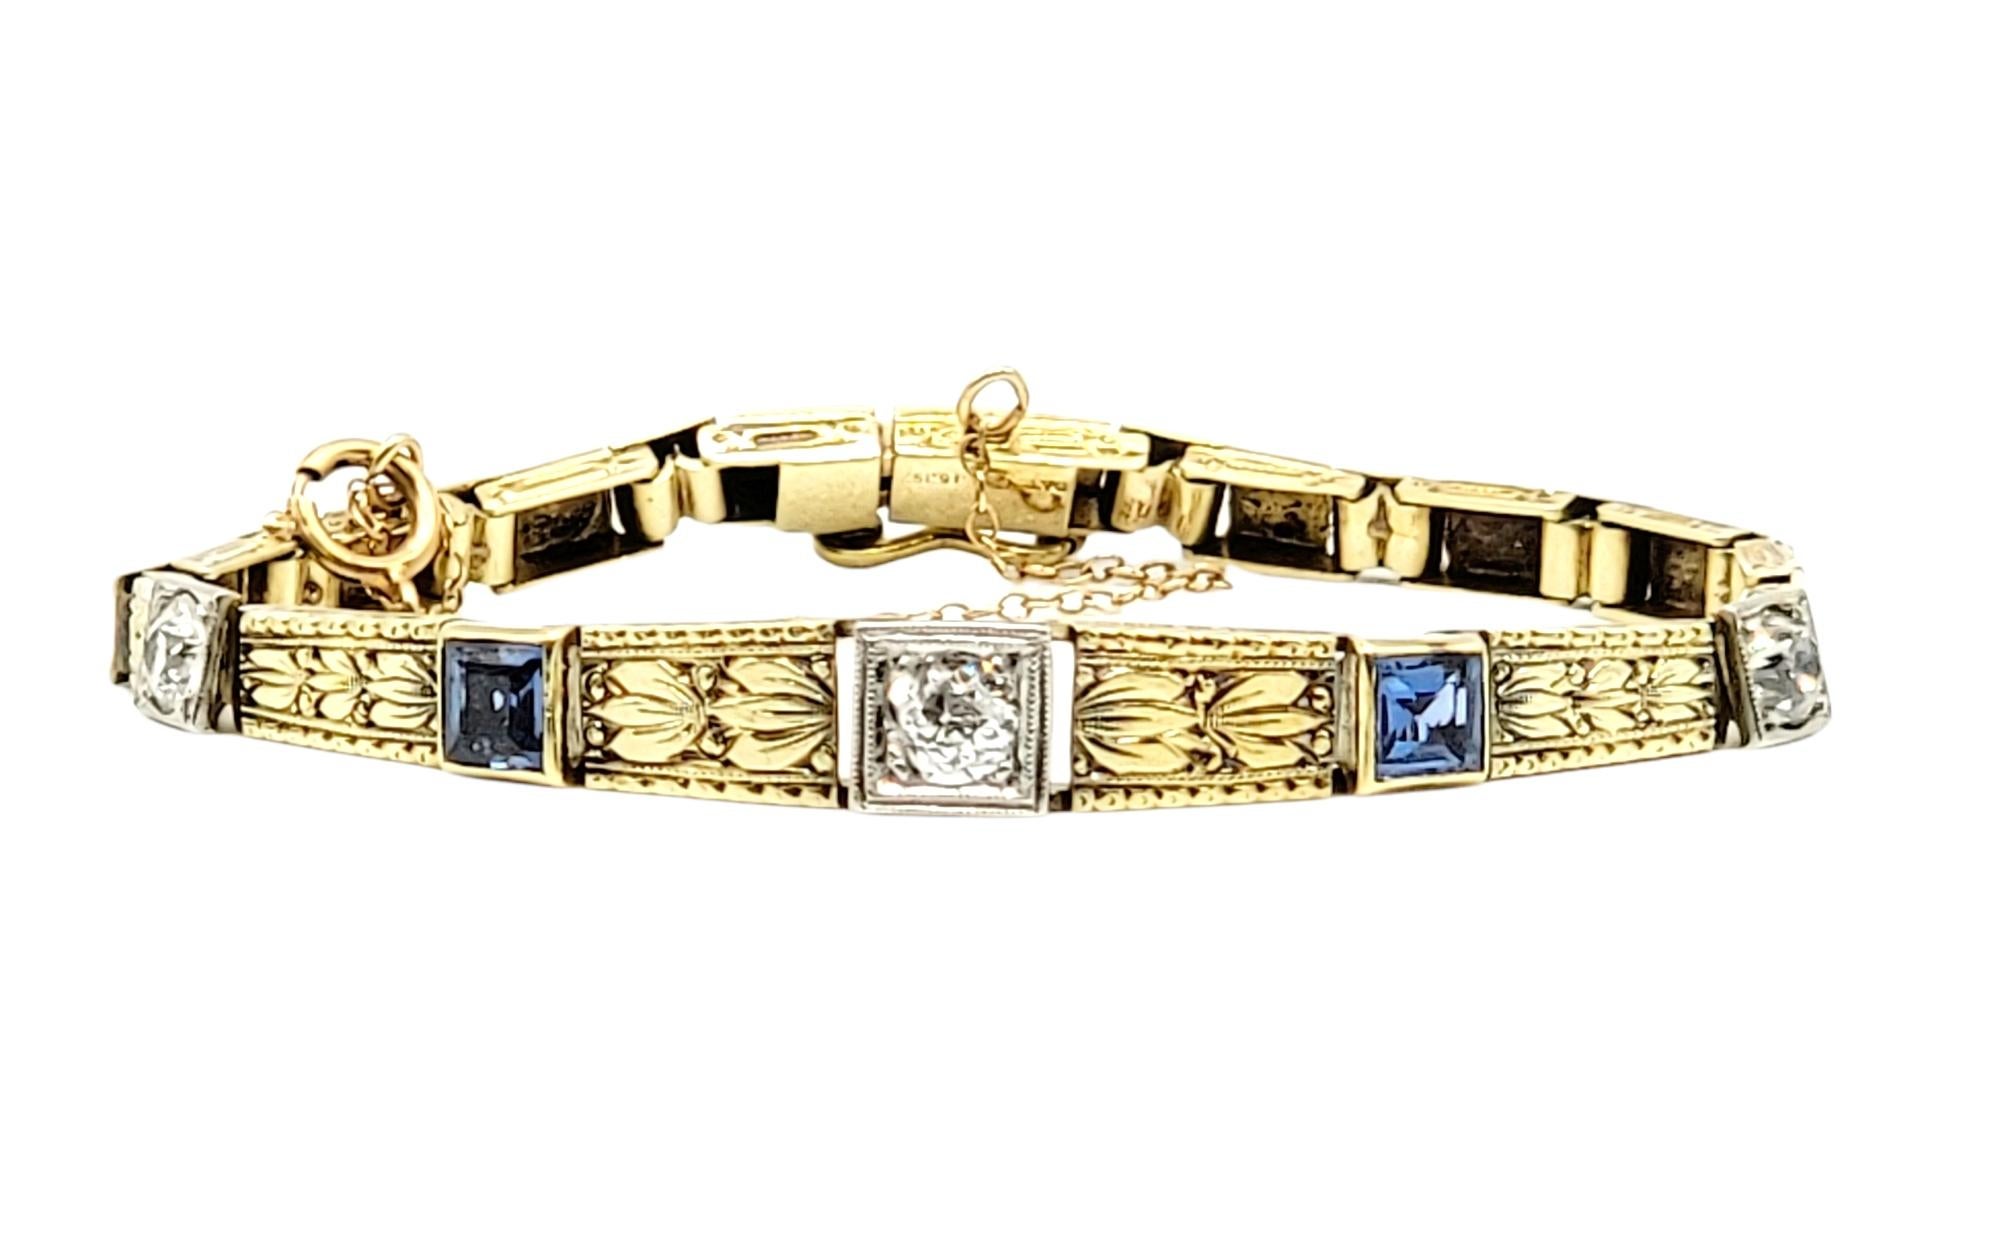 Absolutely gorgeous vintage bracelet accented by glittering diamonds and sapphires. Intricate detail work is displayed throughout, adding to the stunning Old World charm.

Metal: 18K Yellow Gold
Weight: 10.26 grams
Diamonds: .85 ctw
Diamond cut: Old